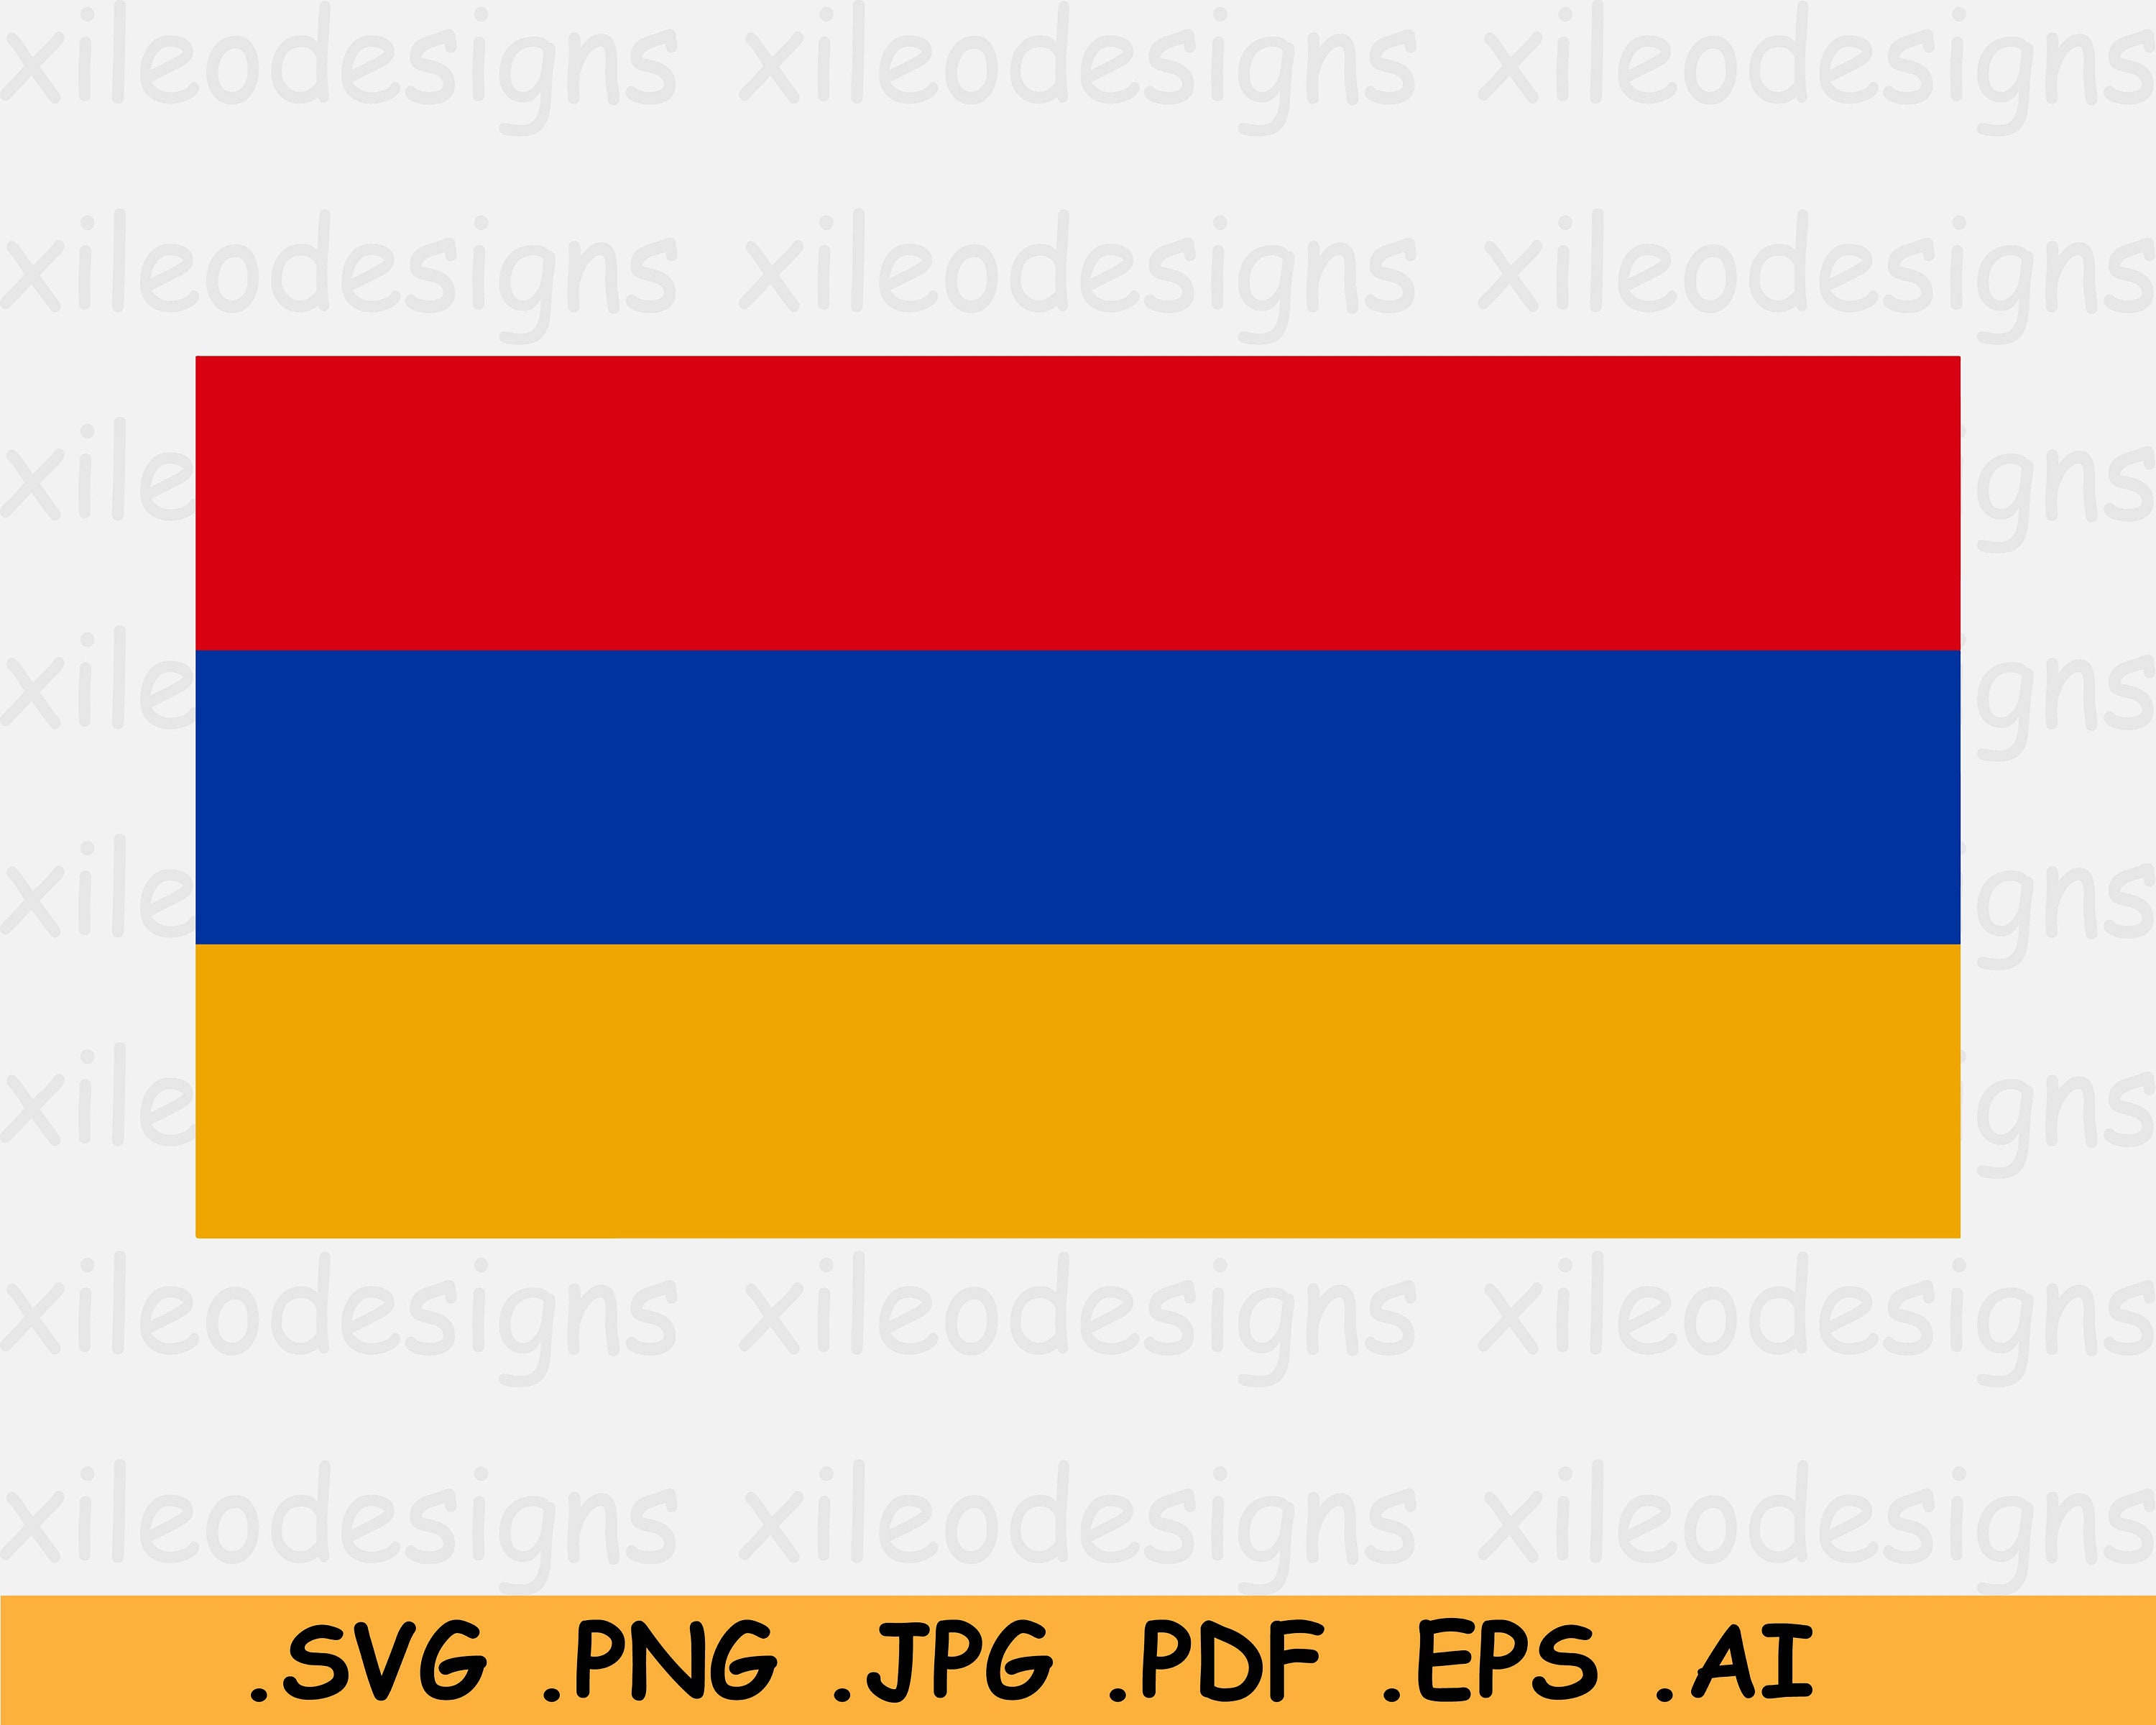 Armenia National Flag SVG, Armenian Nation Country Banner, Cricut Cut File  Digital Download Clipart Vector Graphic Icon Eps Ai Png Jpg Pdf - Etsy